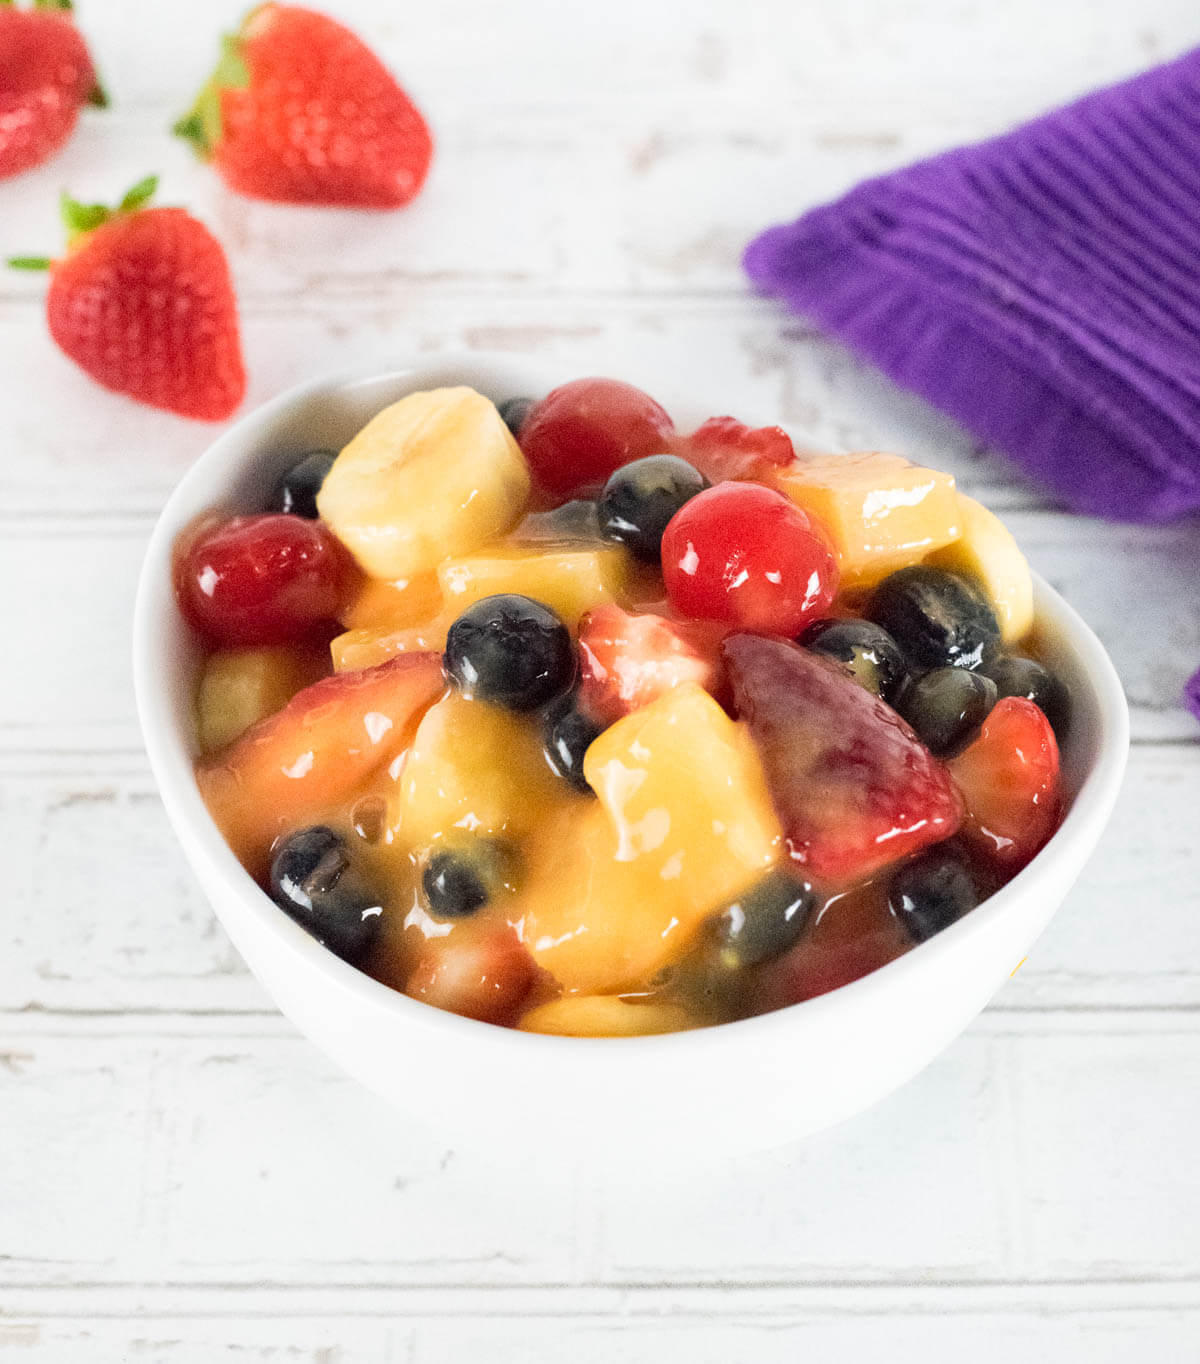 Fruit salad with pudding.